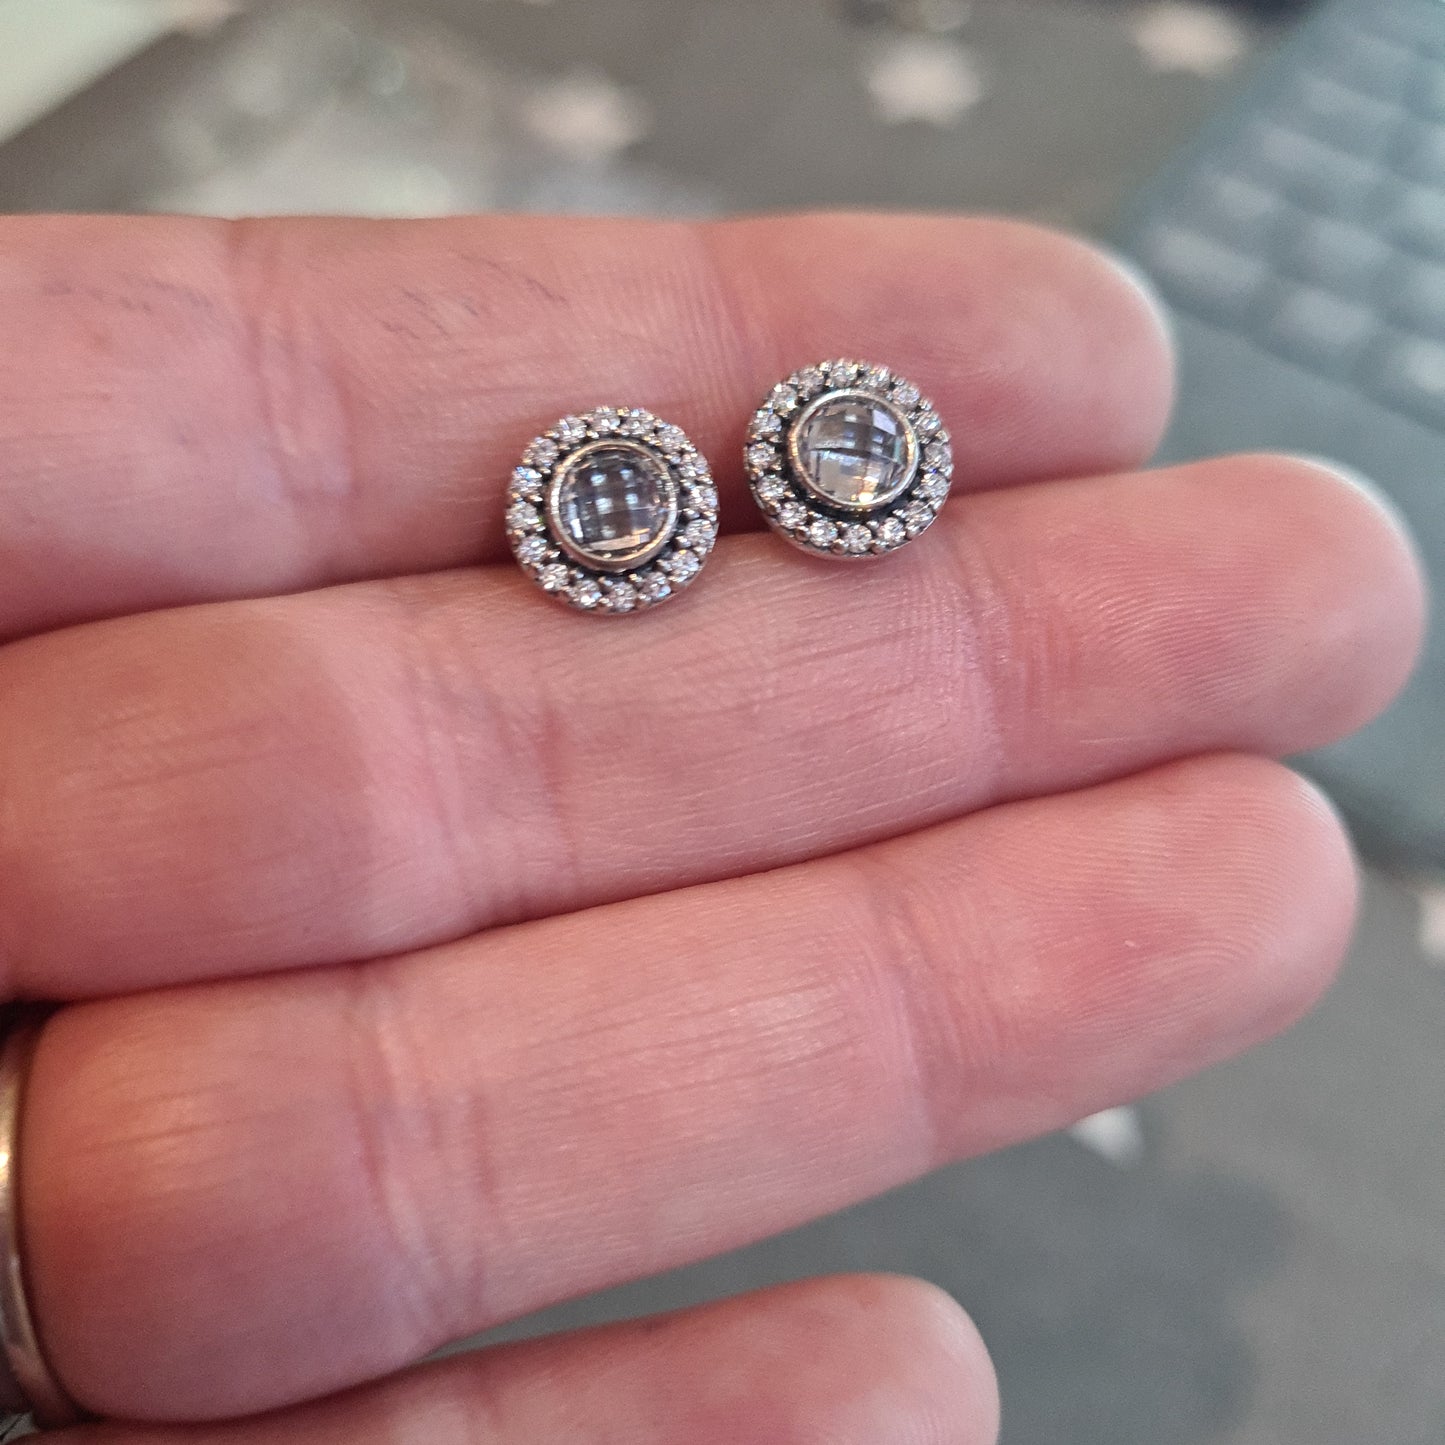 Genuine Pandora Circle Pave Sparkle With CZ Clear Stone Earrings Studs